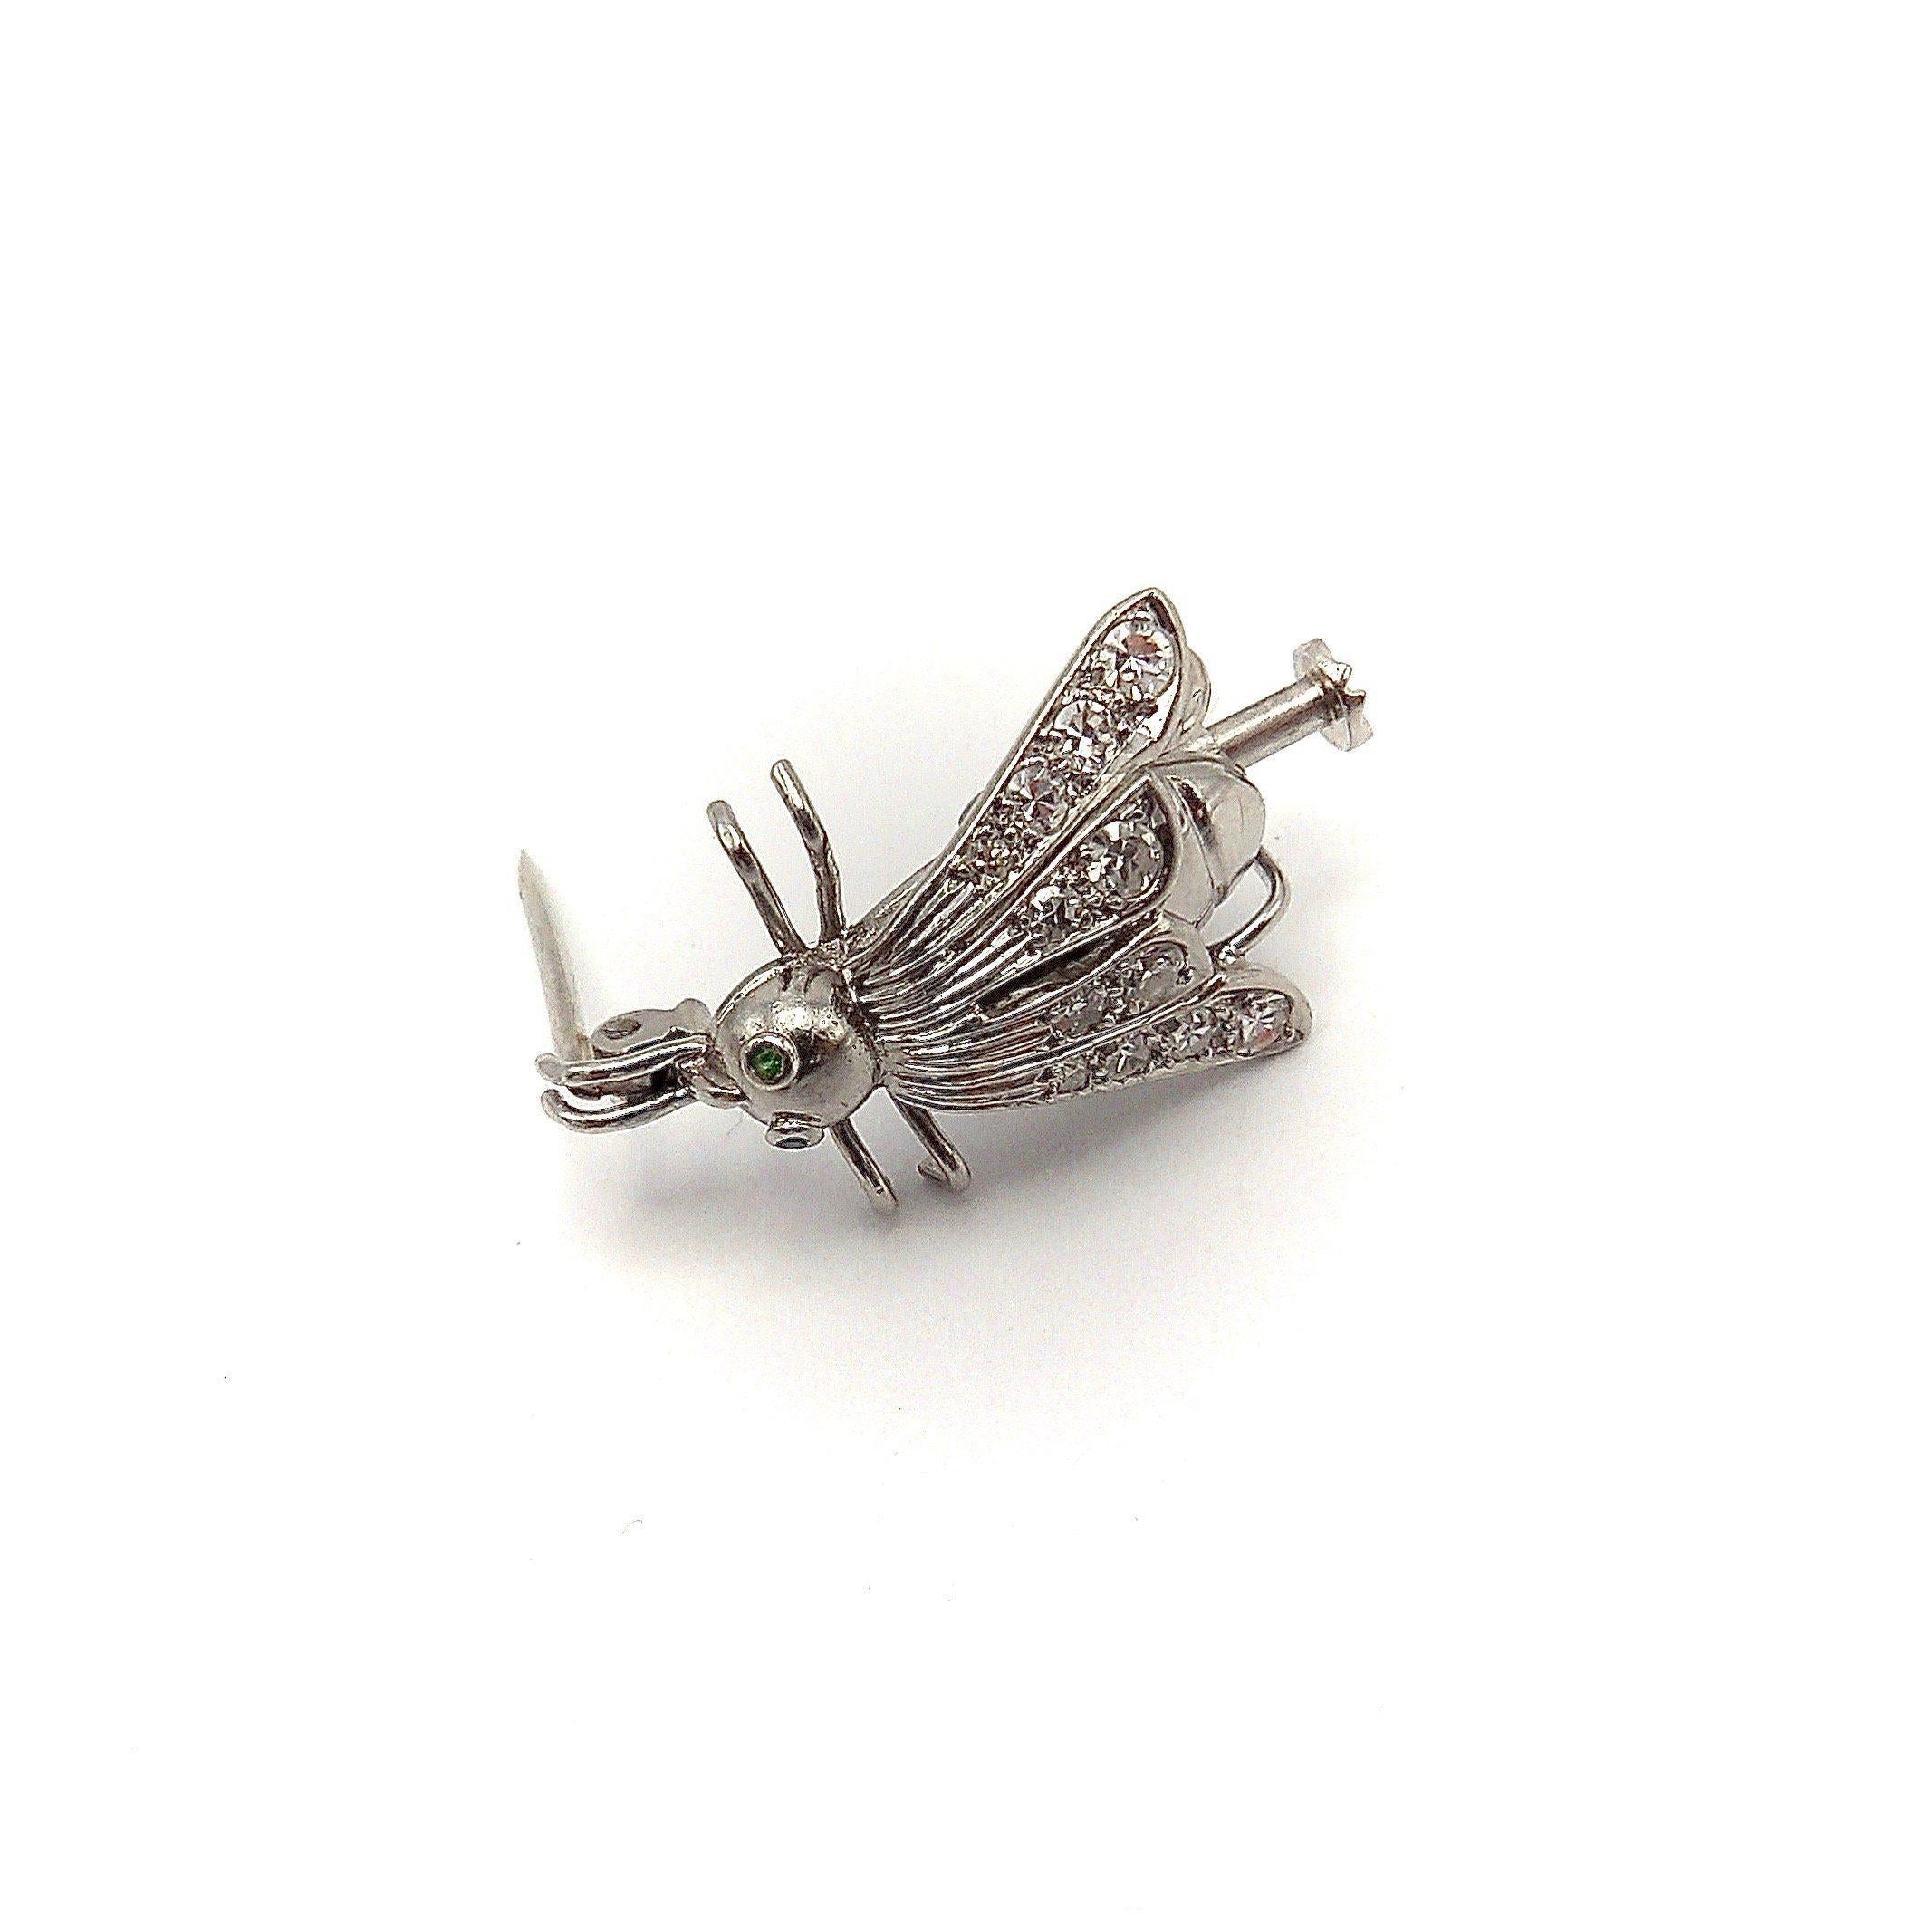 Women's or Men's Platinum Art Deco Fly Pin with Emeralds and Diamonds